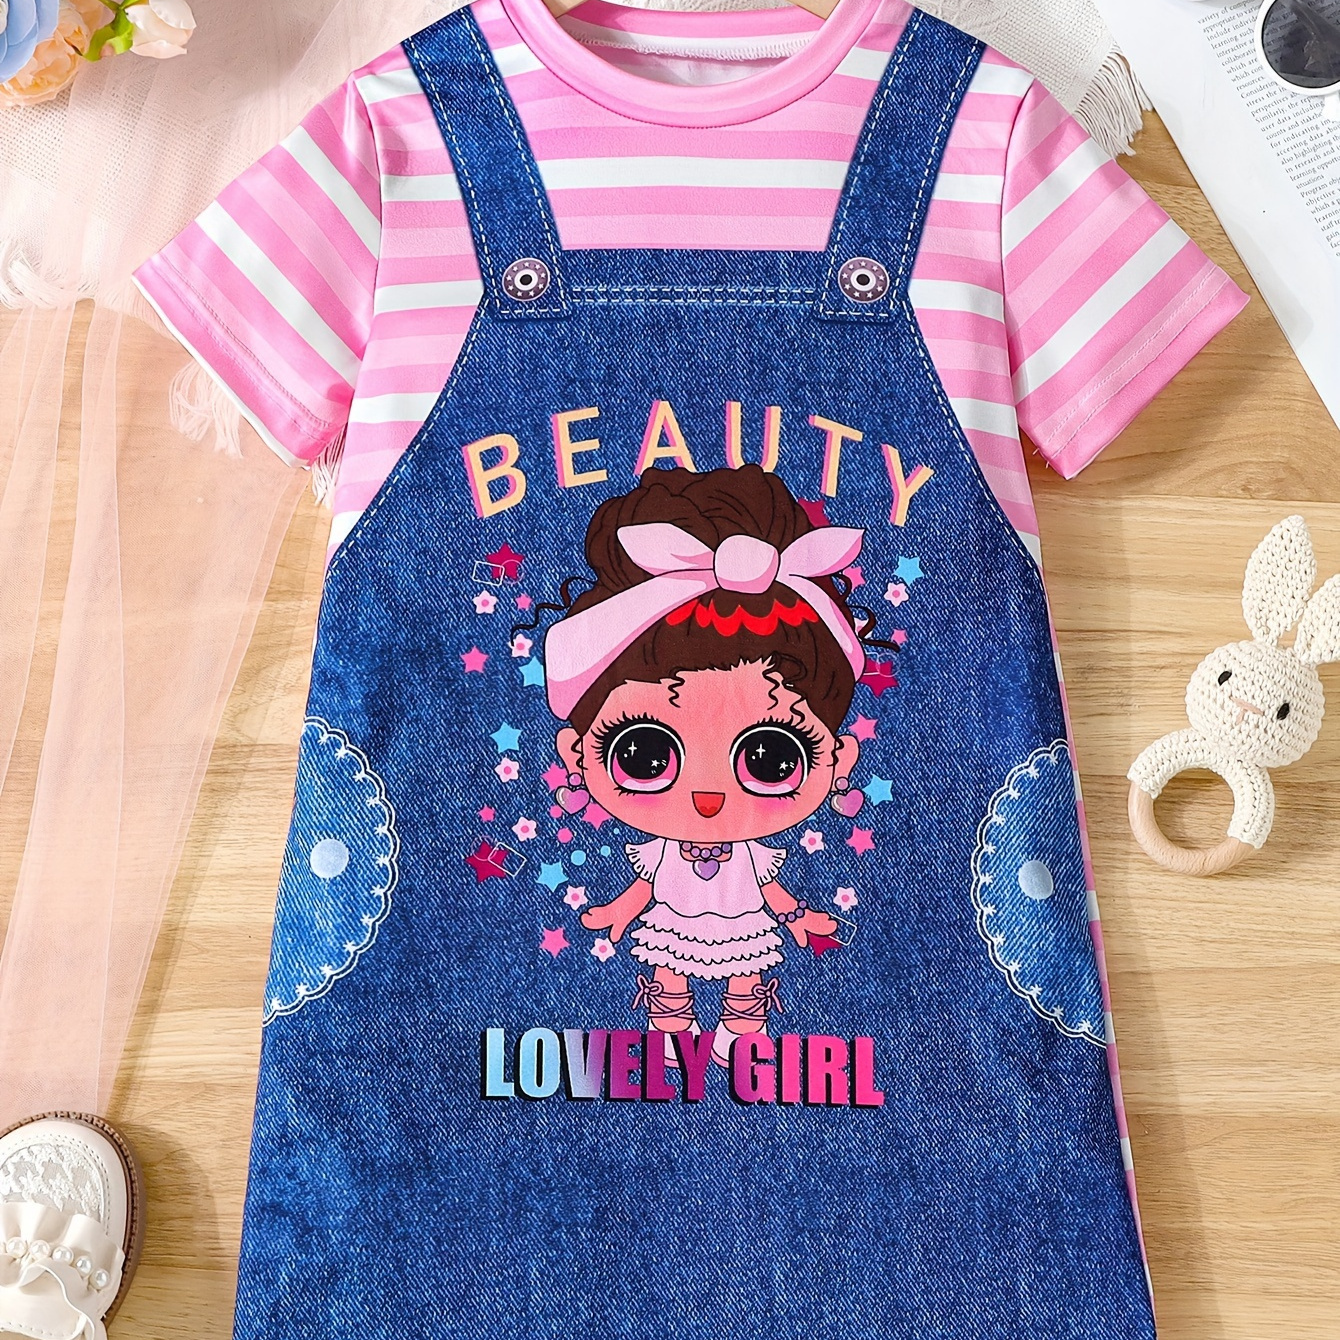 

Lovely Doll & Suspender Pattern Striped T-shirt Dress For Girls Comfy Short Sleeve Casual Dresses, Summer Clothing Gift